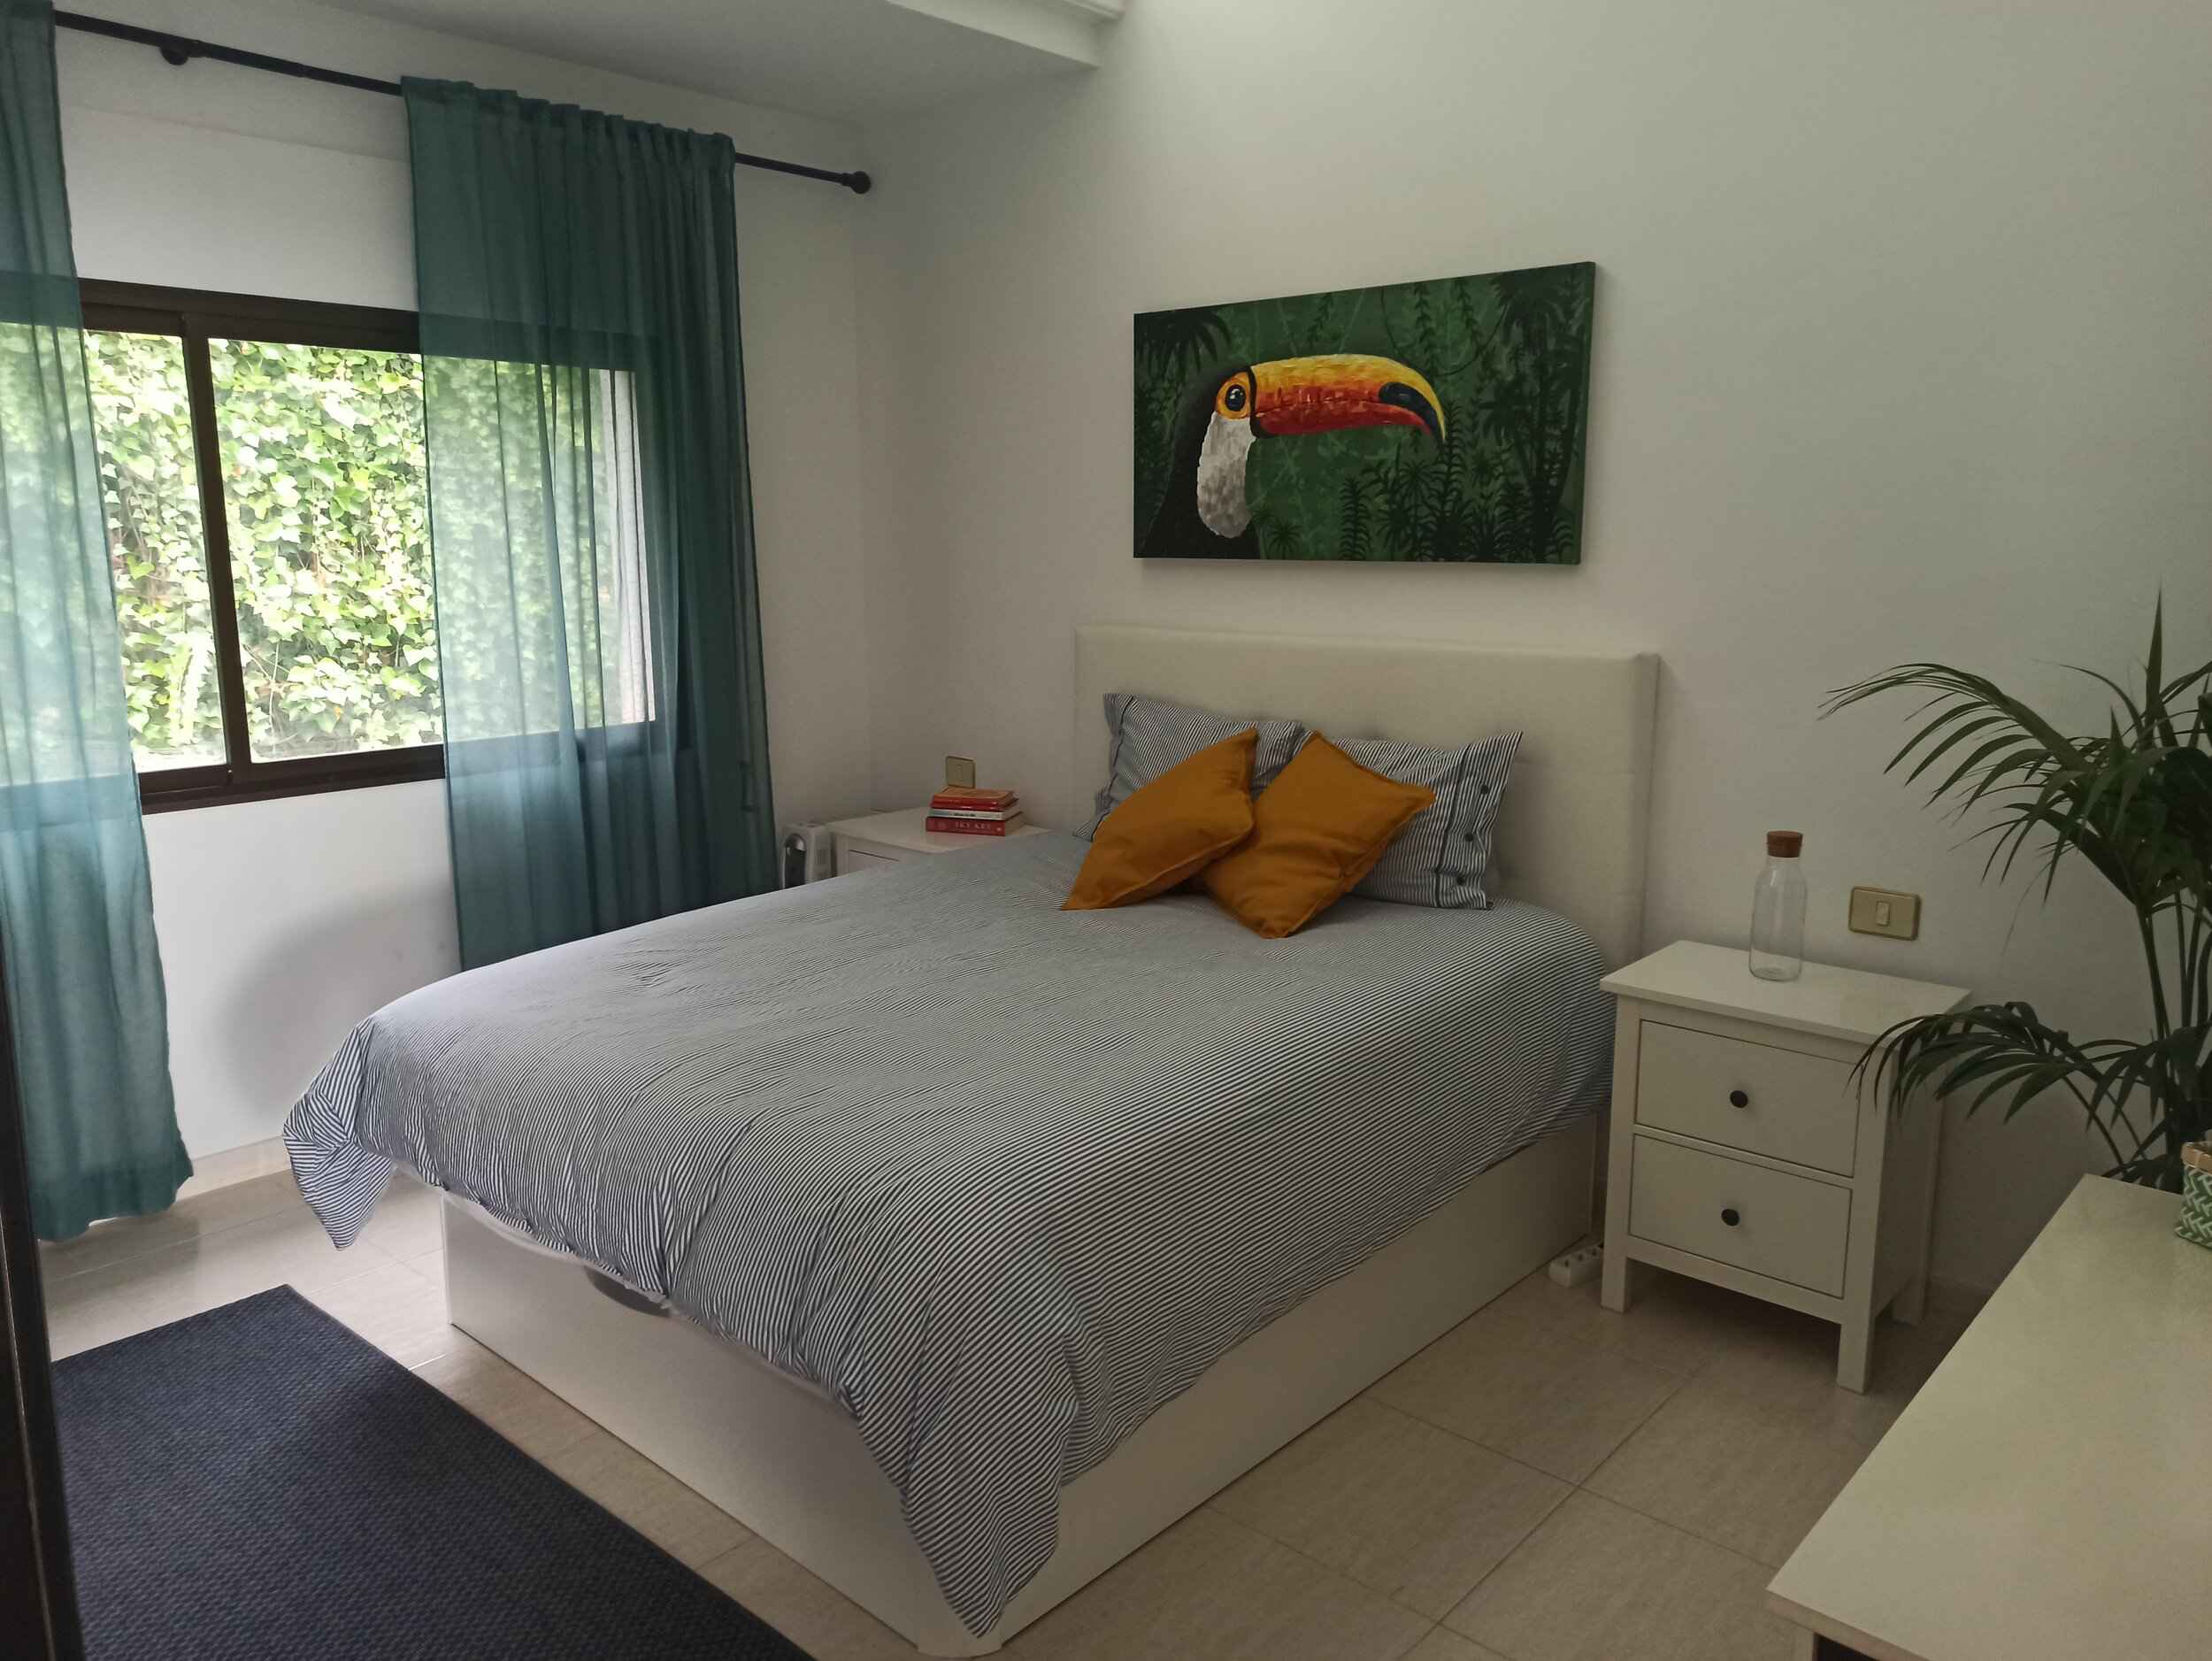 Enjoy the peaceful Tucan Room and wake up to the singing of birds in the lush green backyard. This spacious room with high ceilings and lovely natural light shares a bathroom with one other room.